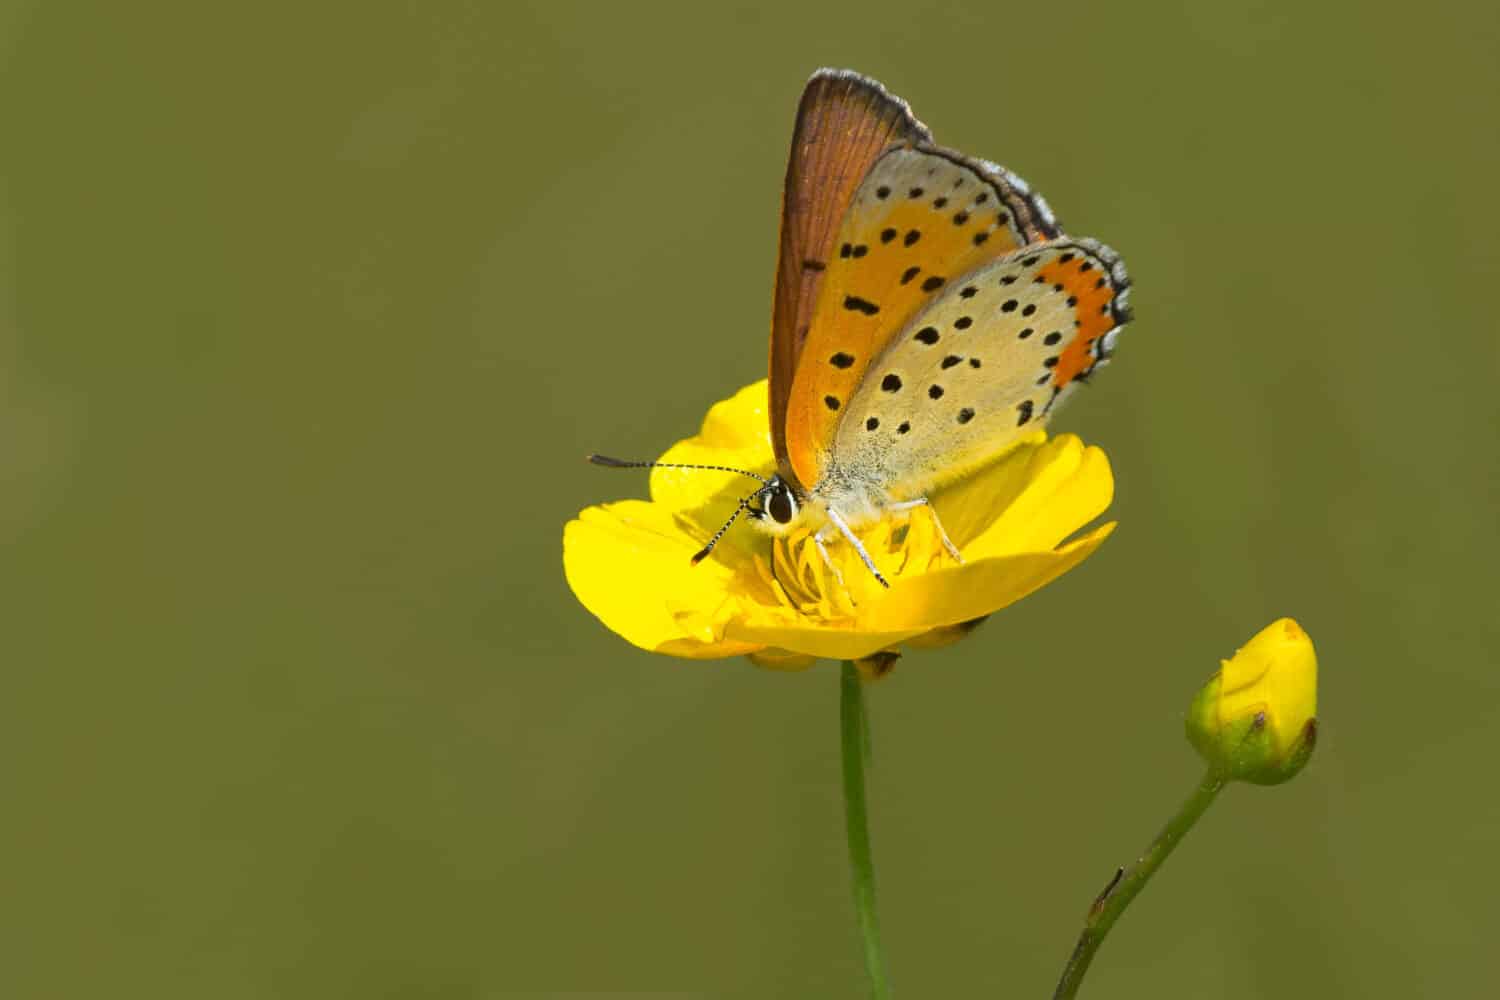 Bronze Copper Butterfly perched on a buttercup flower collecting nectar. Carden Alvar provincial Park, Kawartha Lakes, Ontario, Canada.